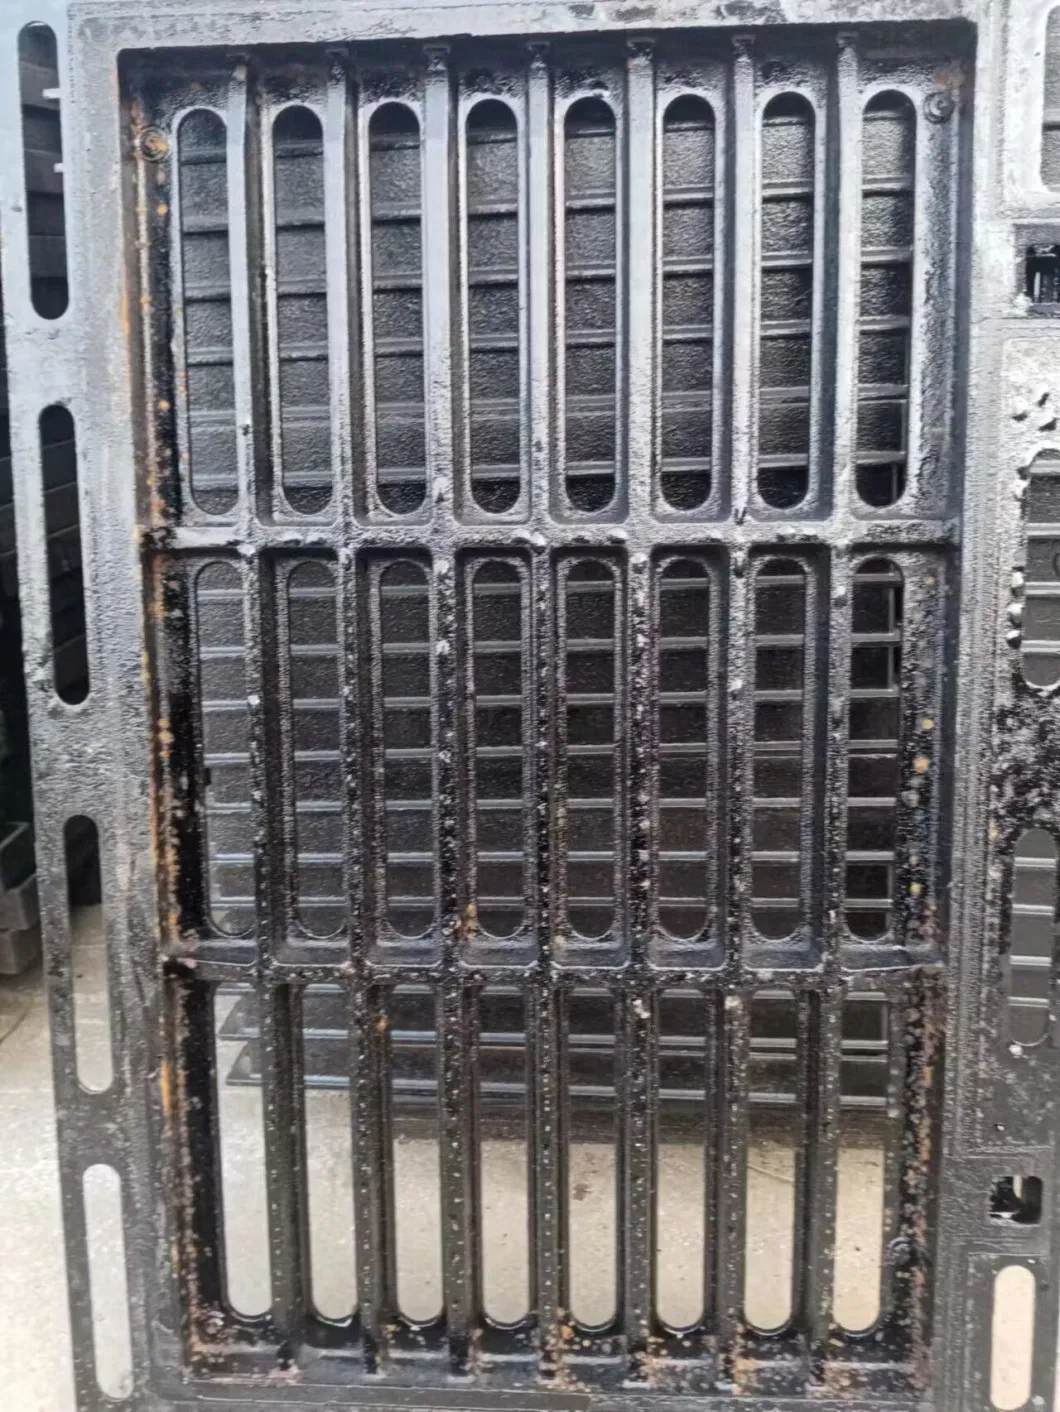 Suitable for Various Roads and Public Facilities with Ductile Iron Manhole Covers/Cast Iron Grate